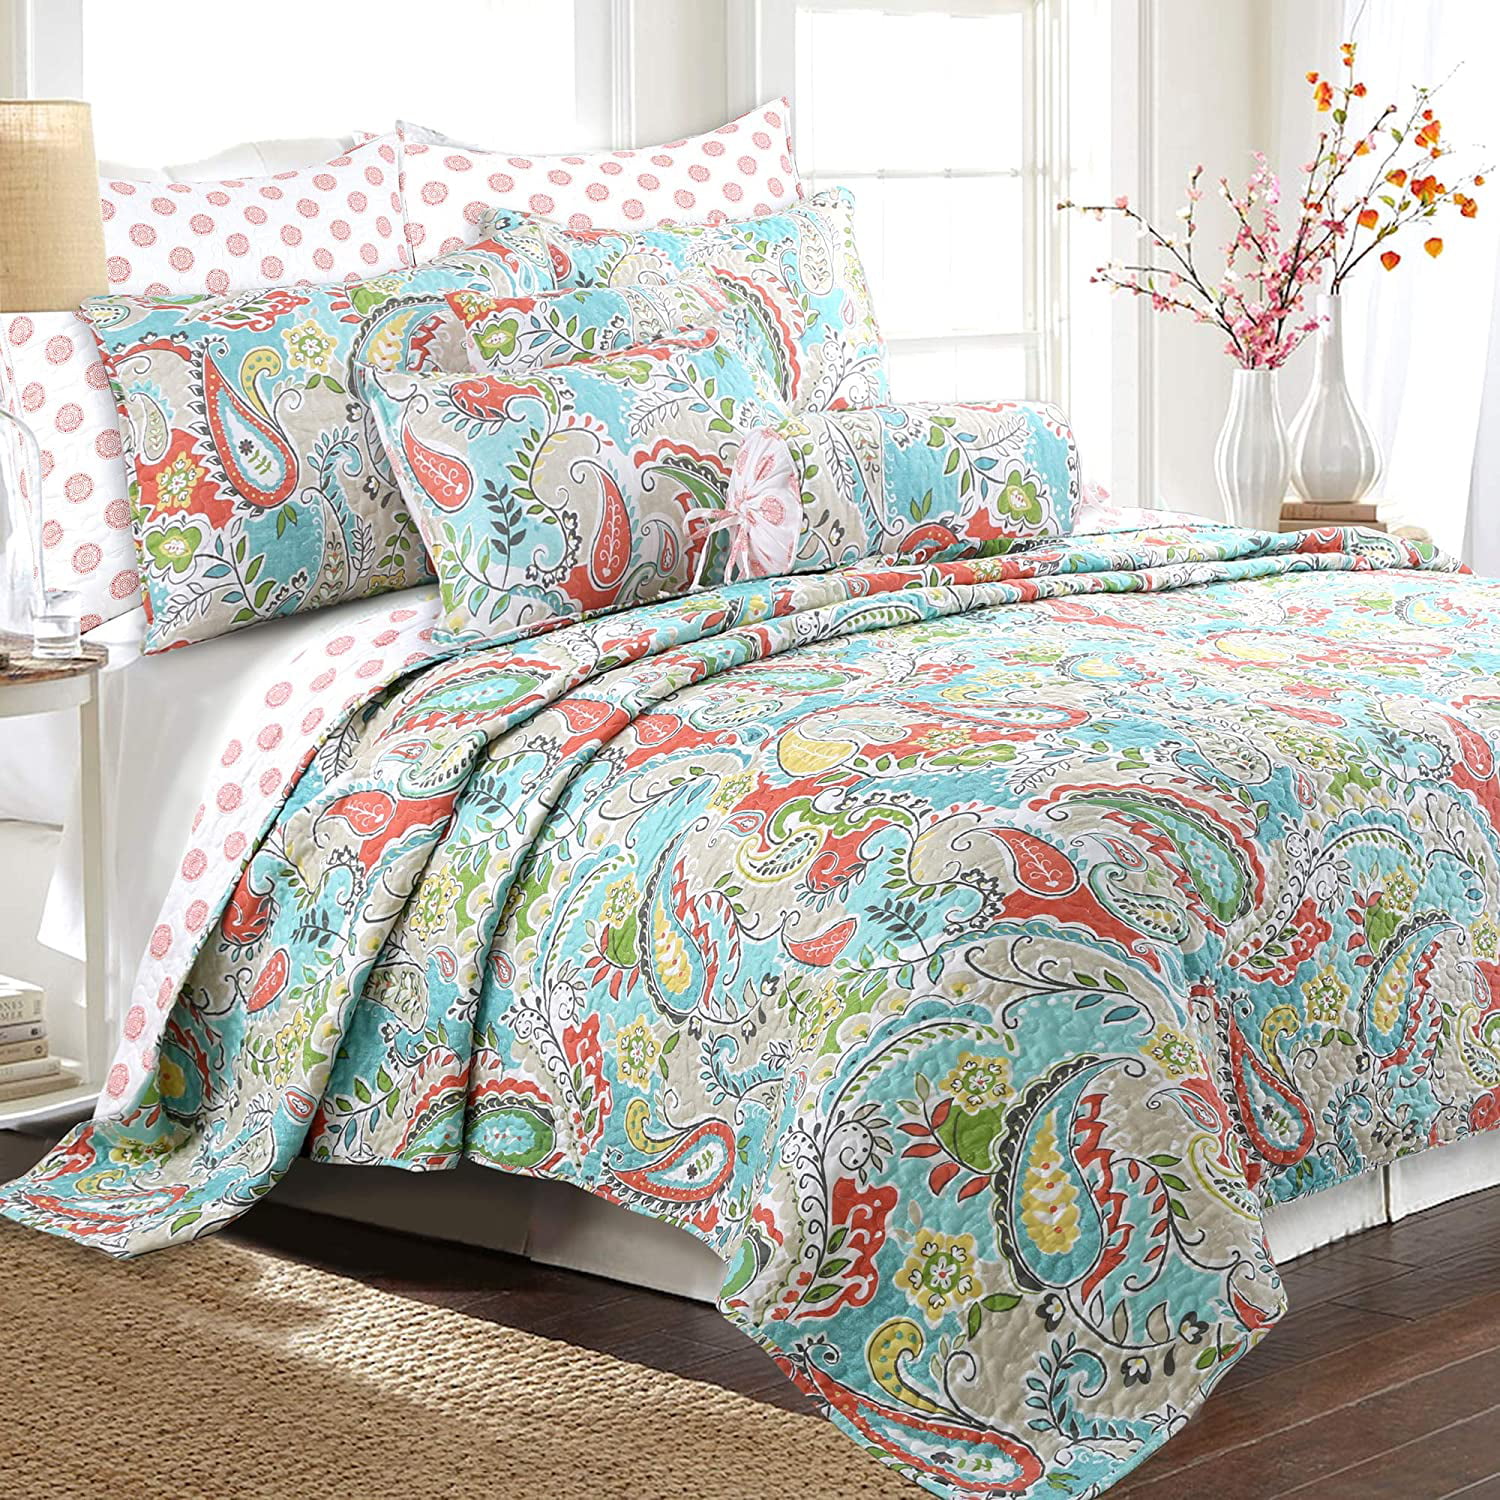 3Pc Quilt Bedspread Sets Bedding Coverlet Bedroom Floral Queen King Size BY012 